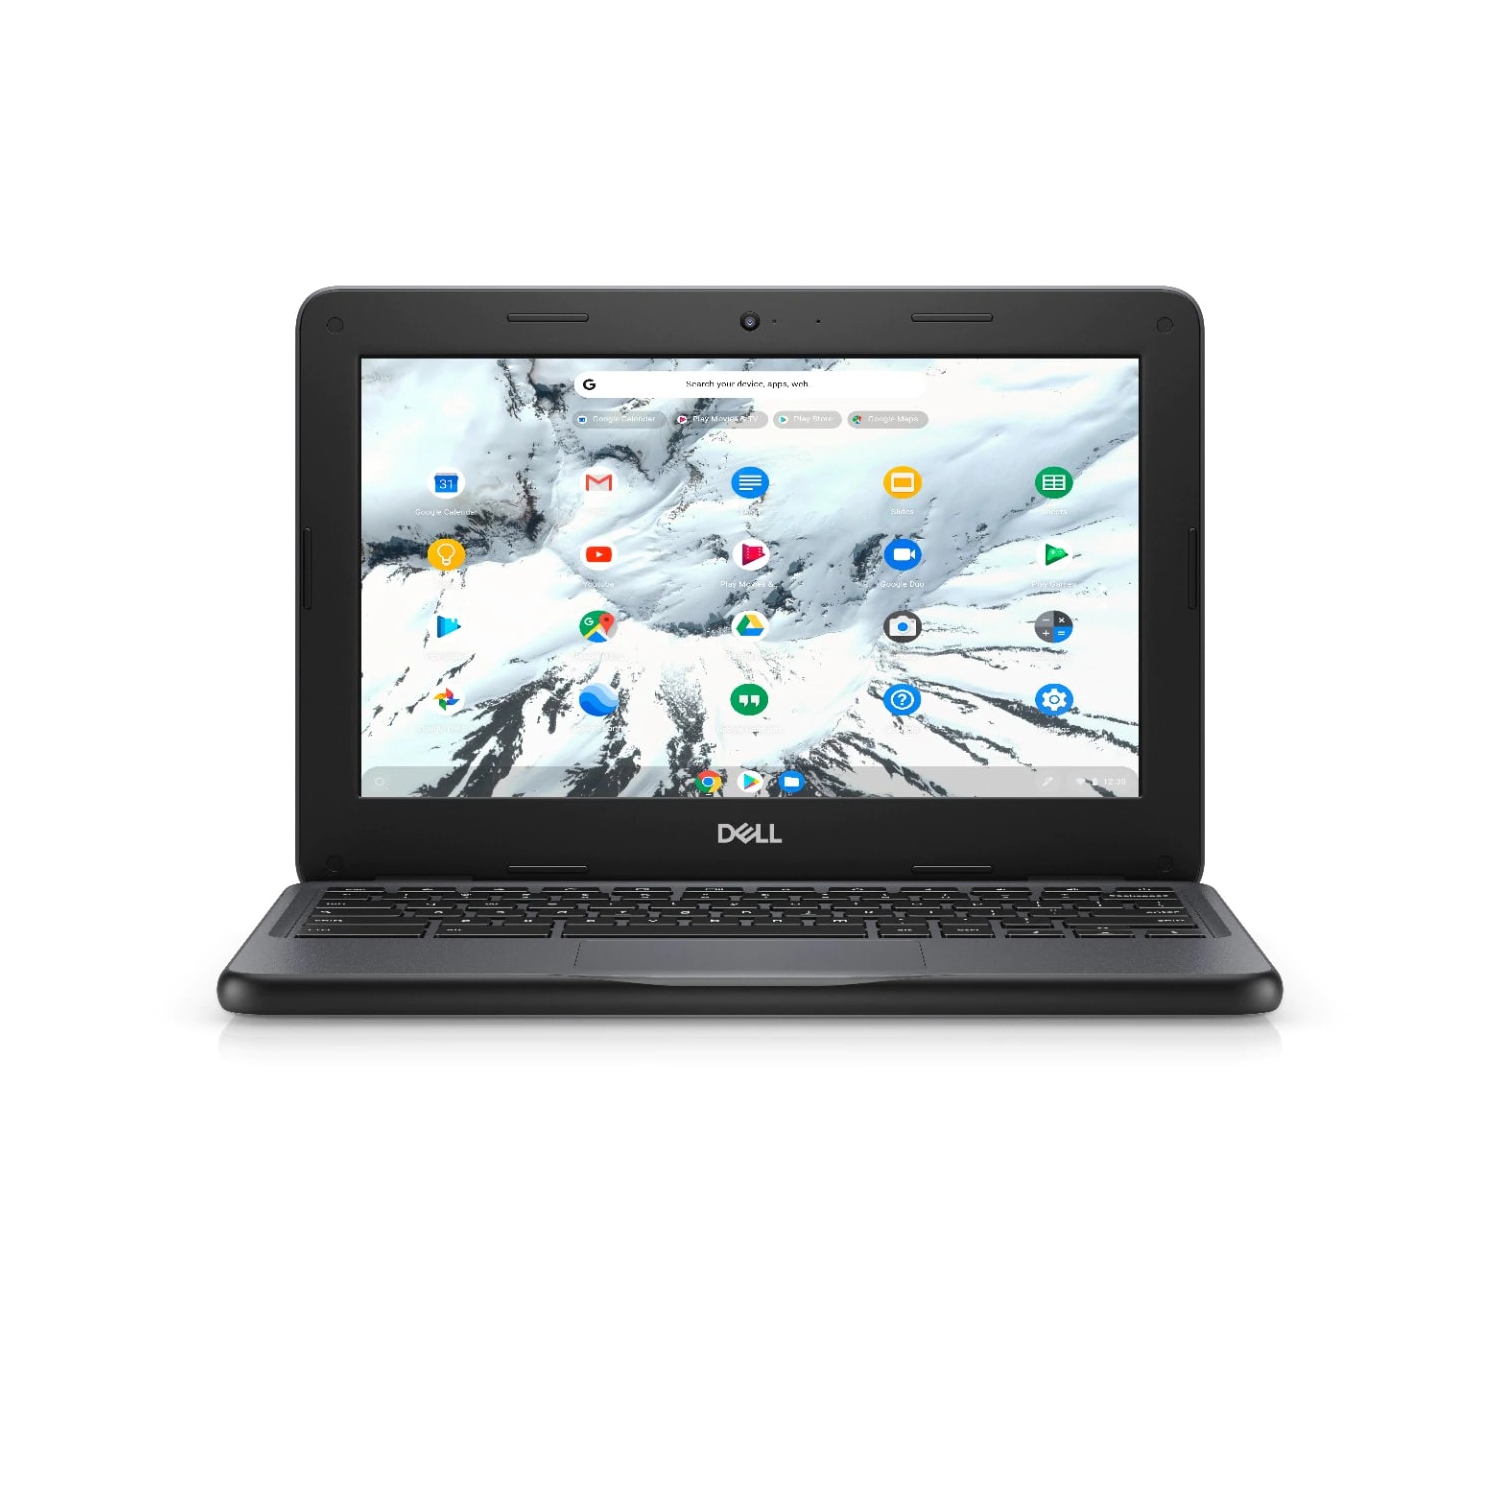 Refurbished (Excellent) - Dell Chromebook 11 3100 Laptop (2019) | 11.6" HD Touch | Core Celeron - 32GB SSD - 4GB RAM | 2 Cores Certified Refurbished